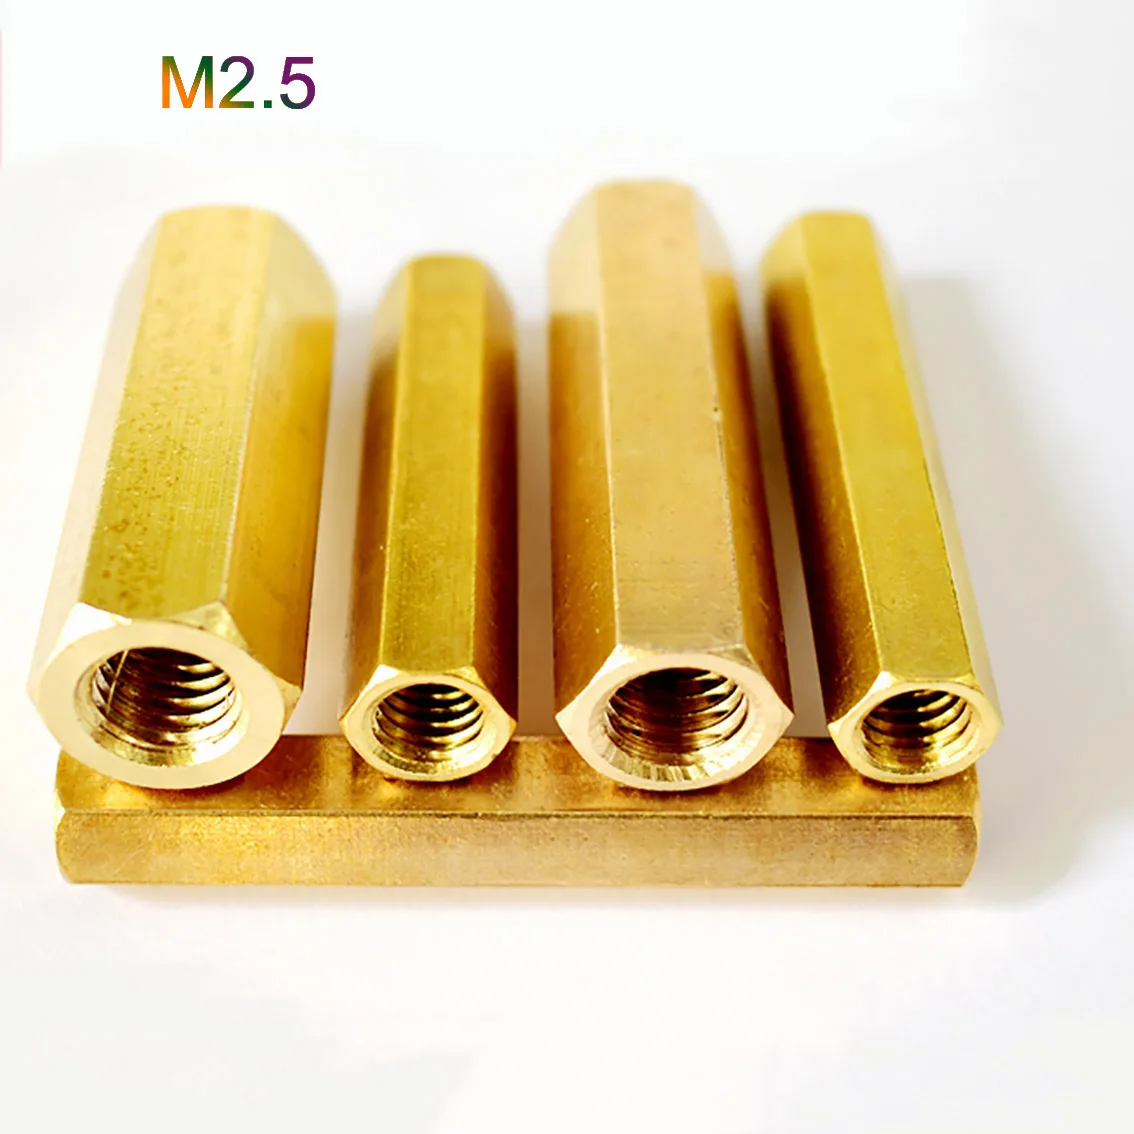 

10Pcs Brass Hex Female To Female Standoff Spacer Column M2.5 Hexagon Hand Knob Nuts PCB Motherboard DIY Model Parts